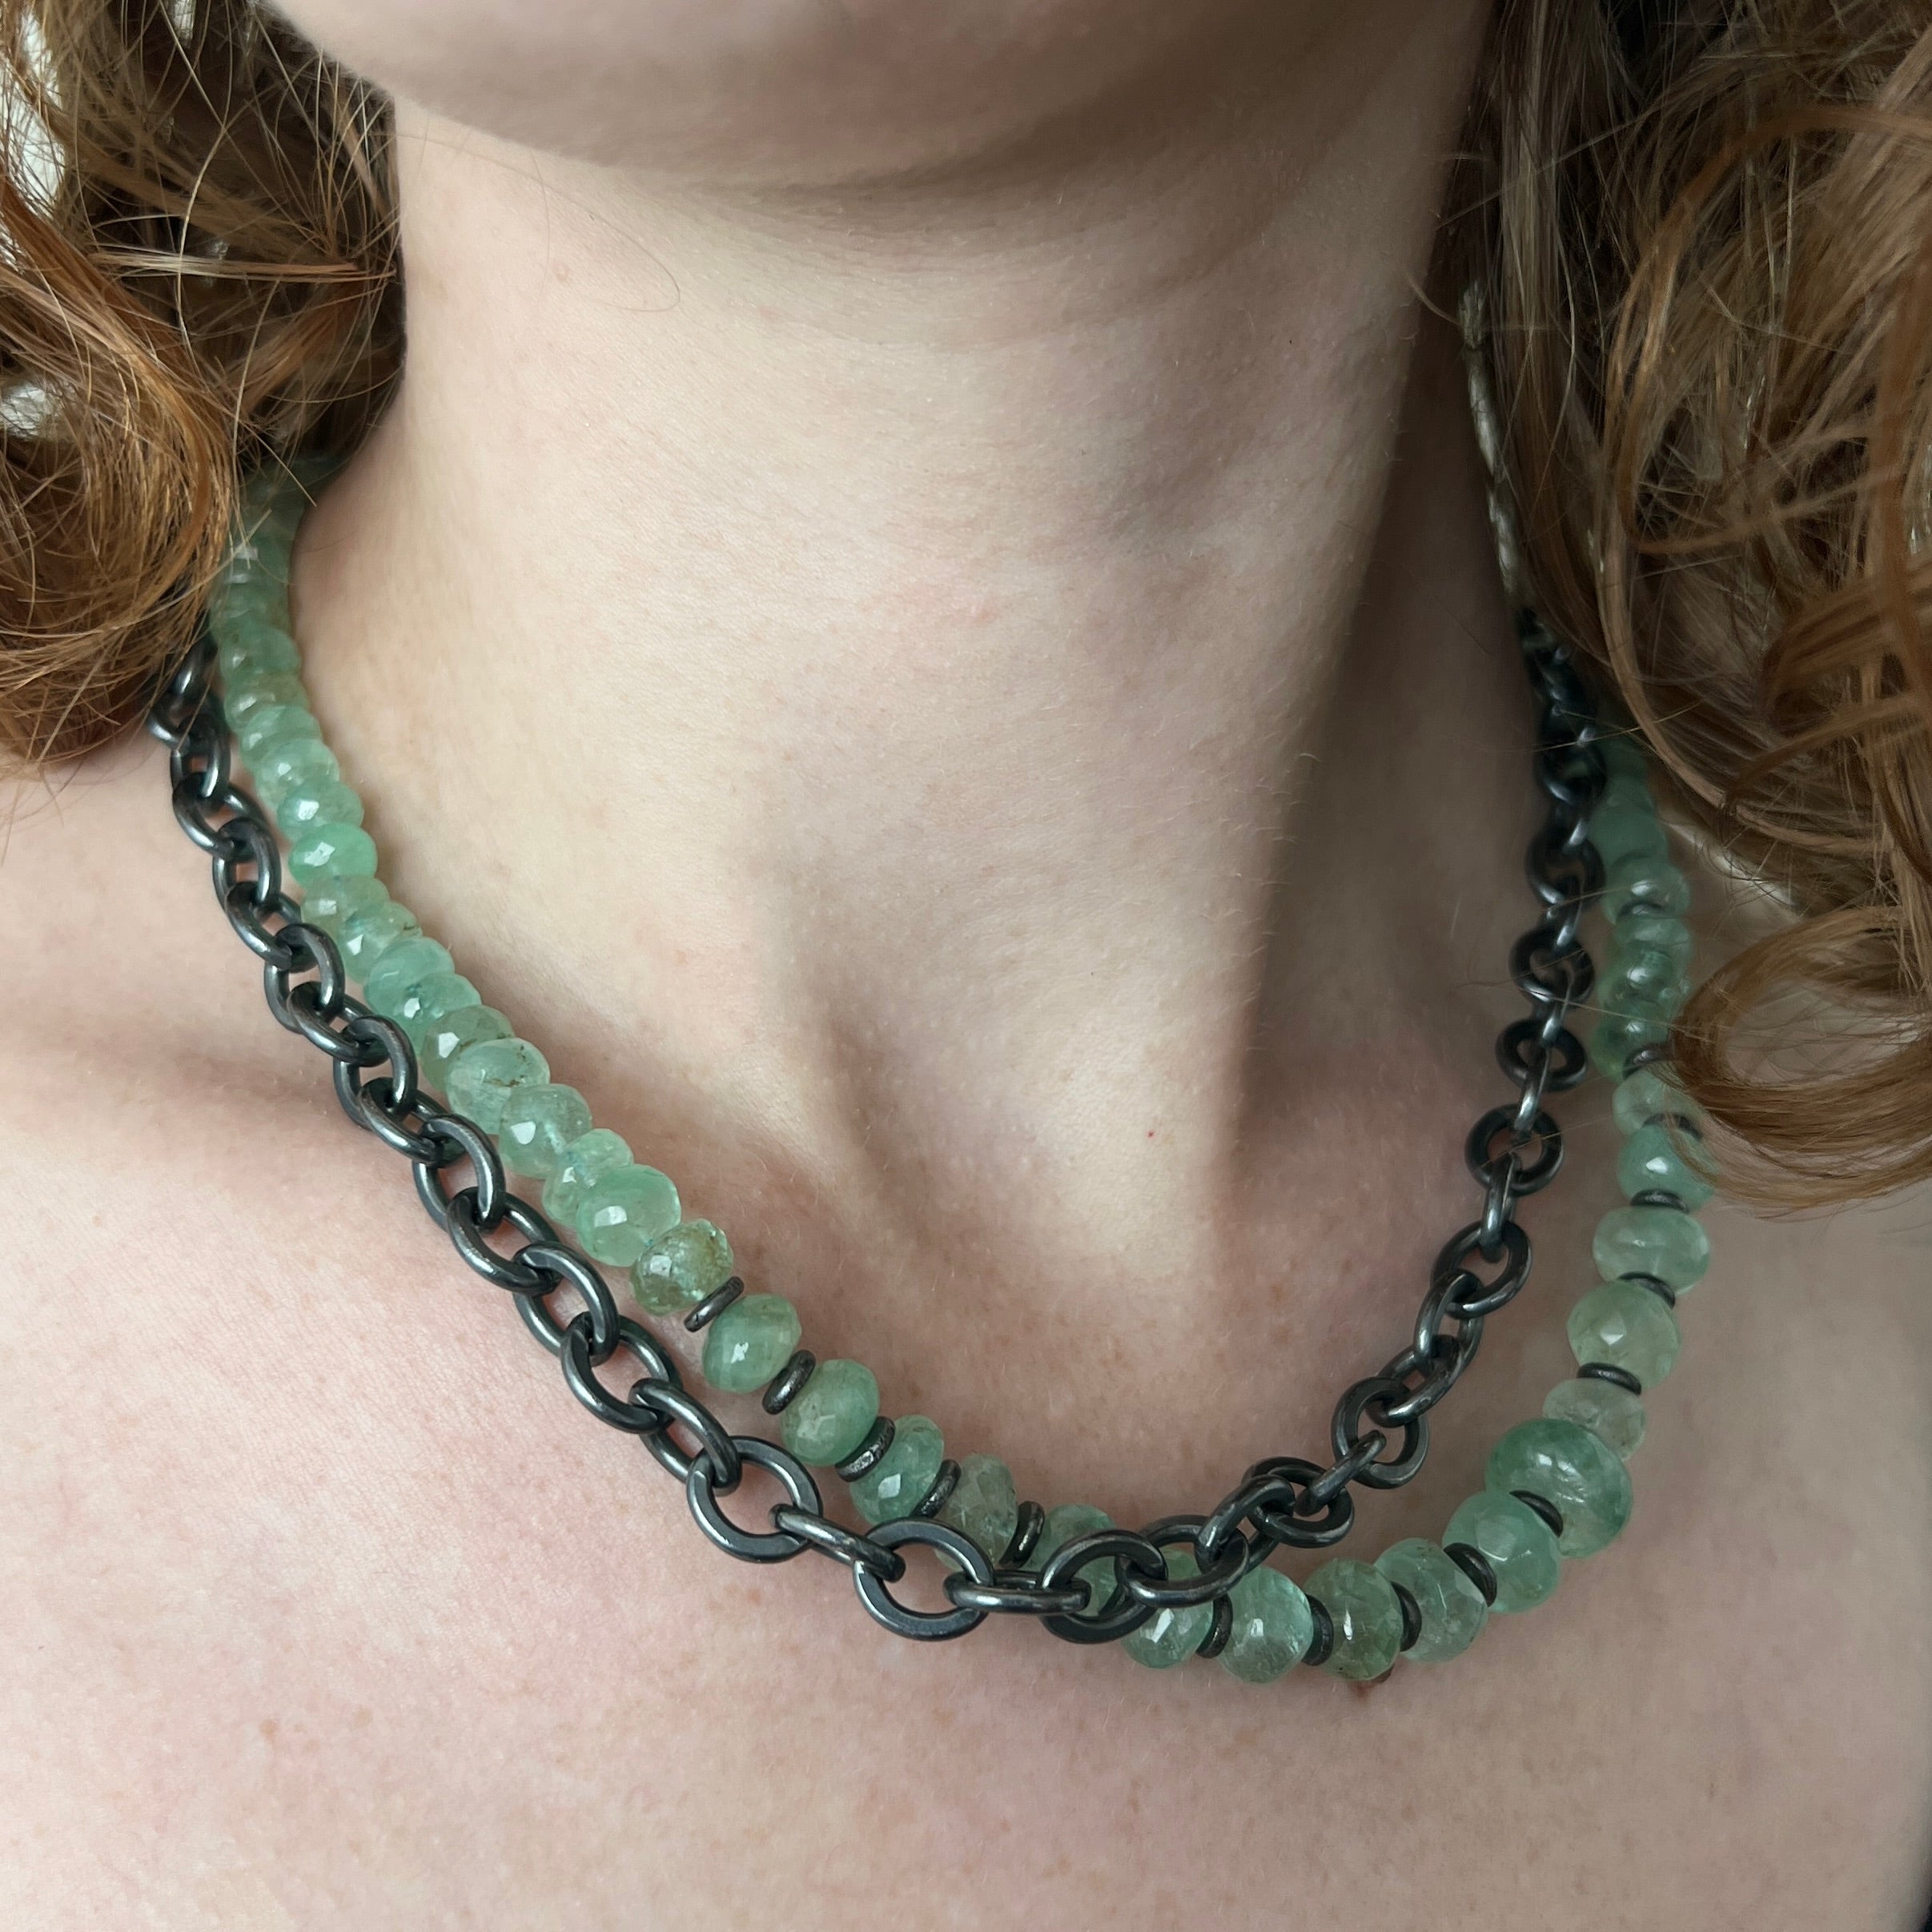 Emerald rondelle bead necklace with sterling silver spacers and